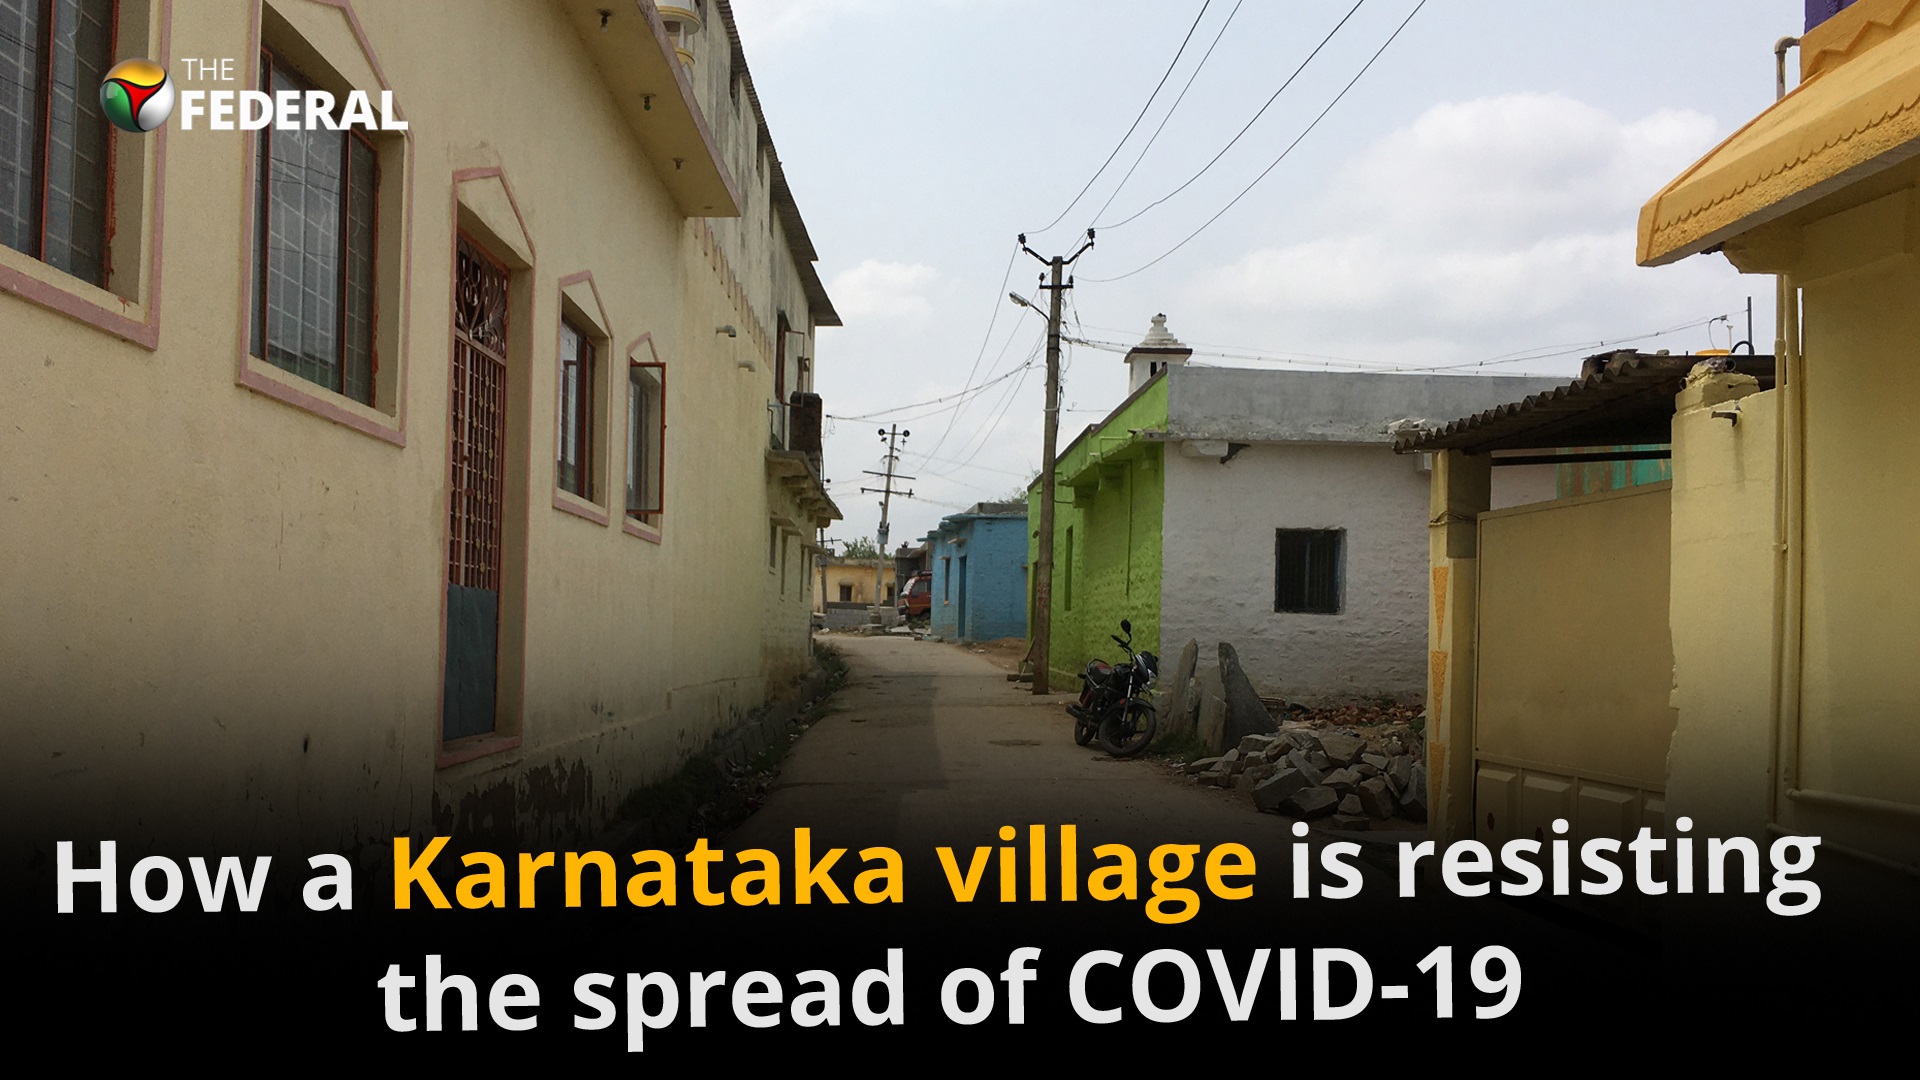 How a Karnataka village is resisting the spread of COVID-19